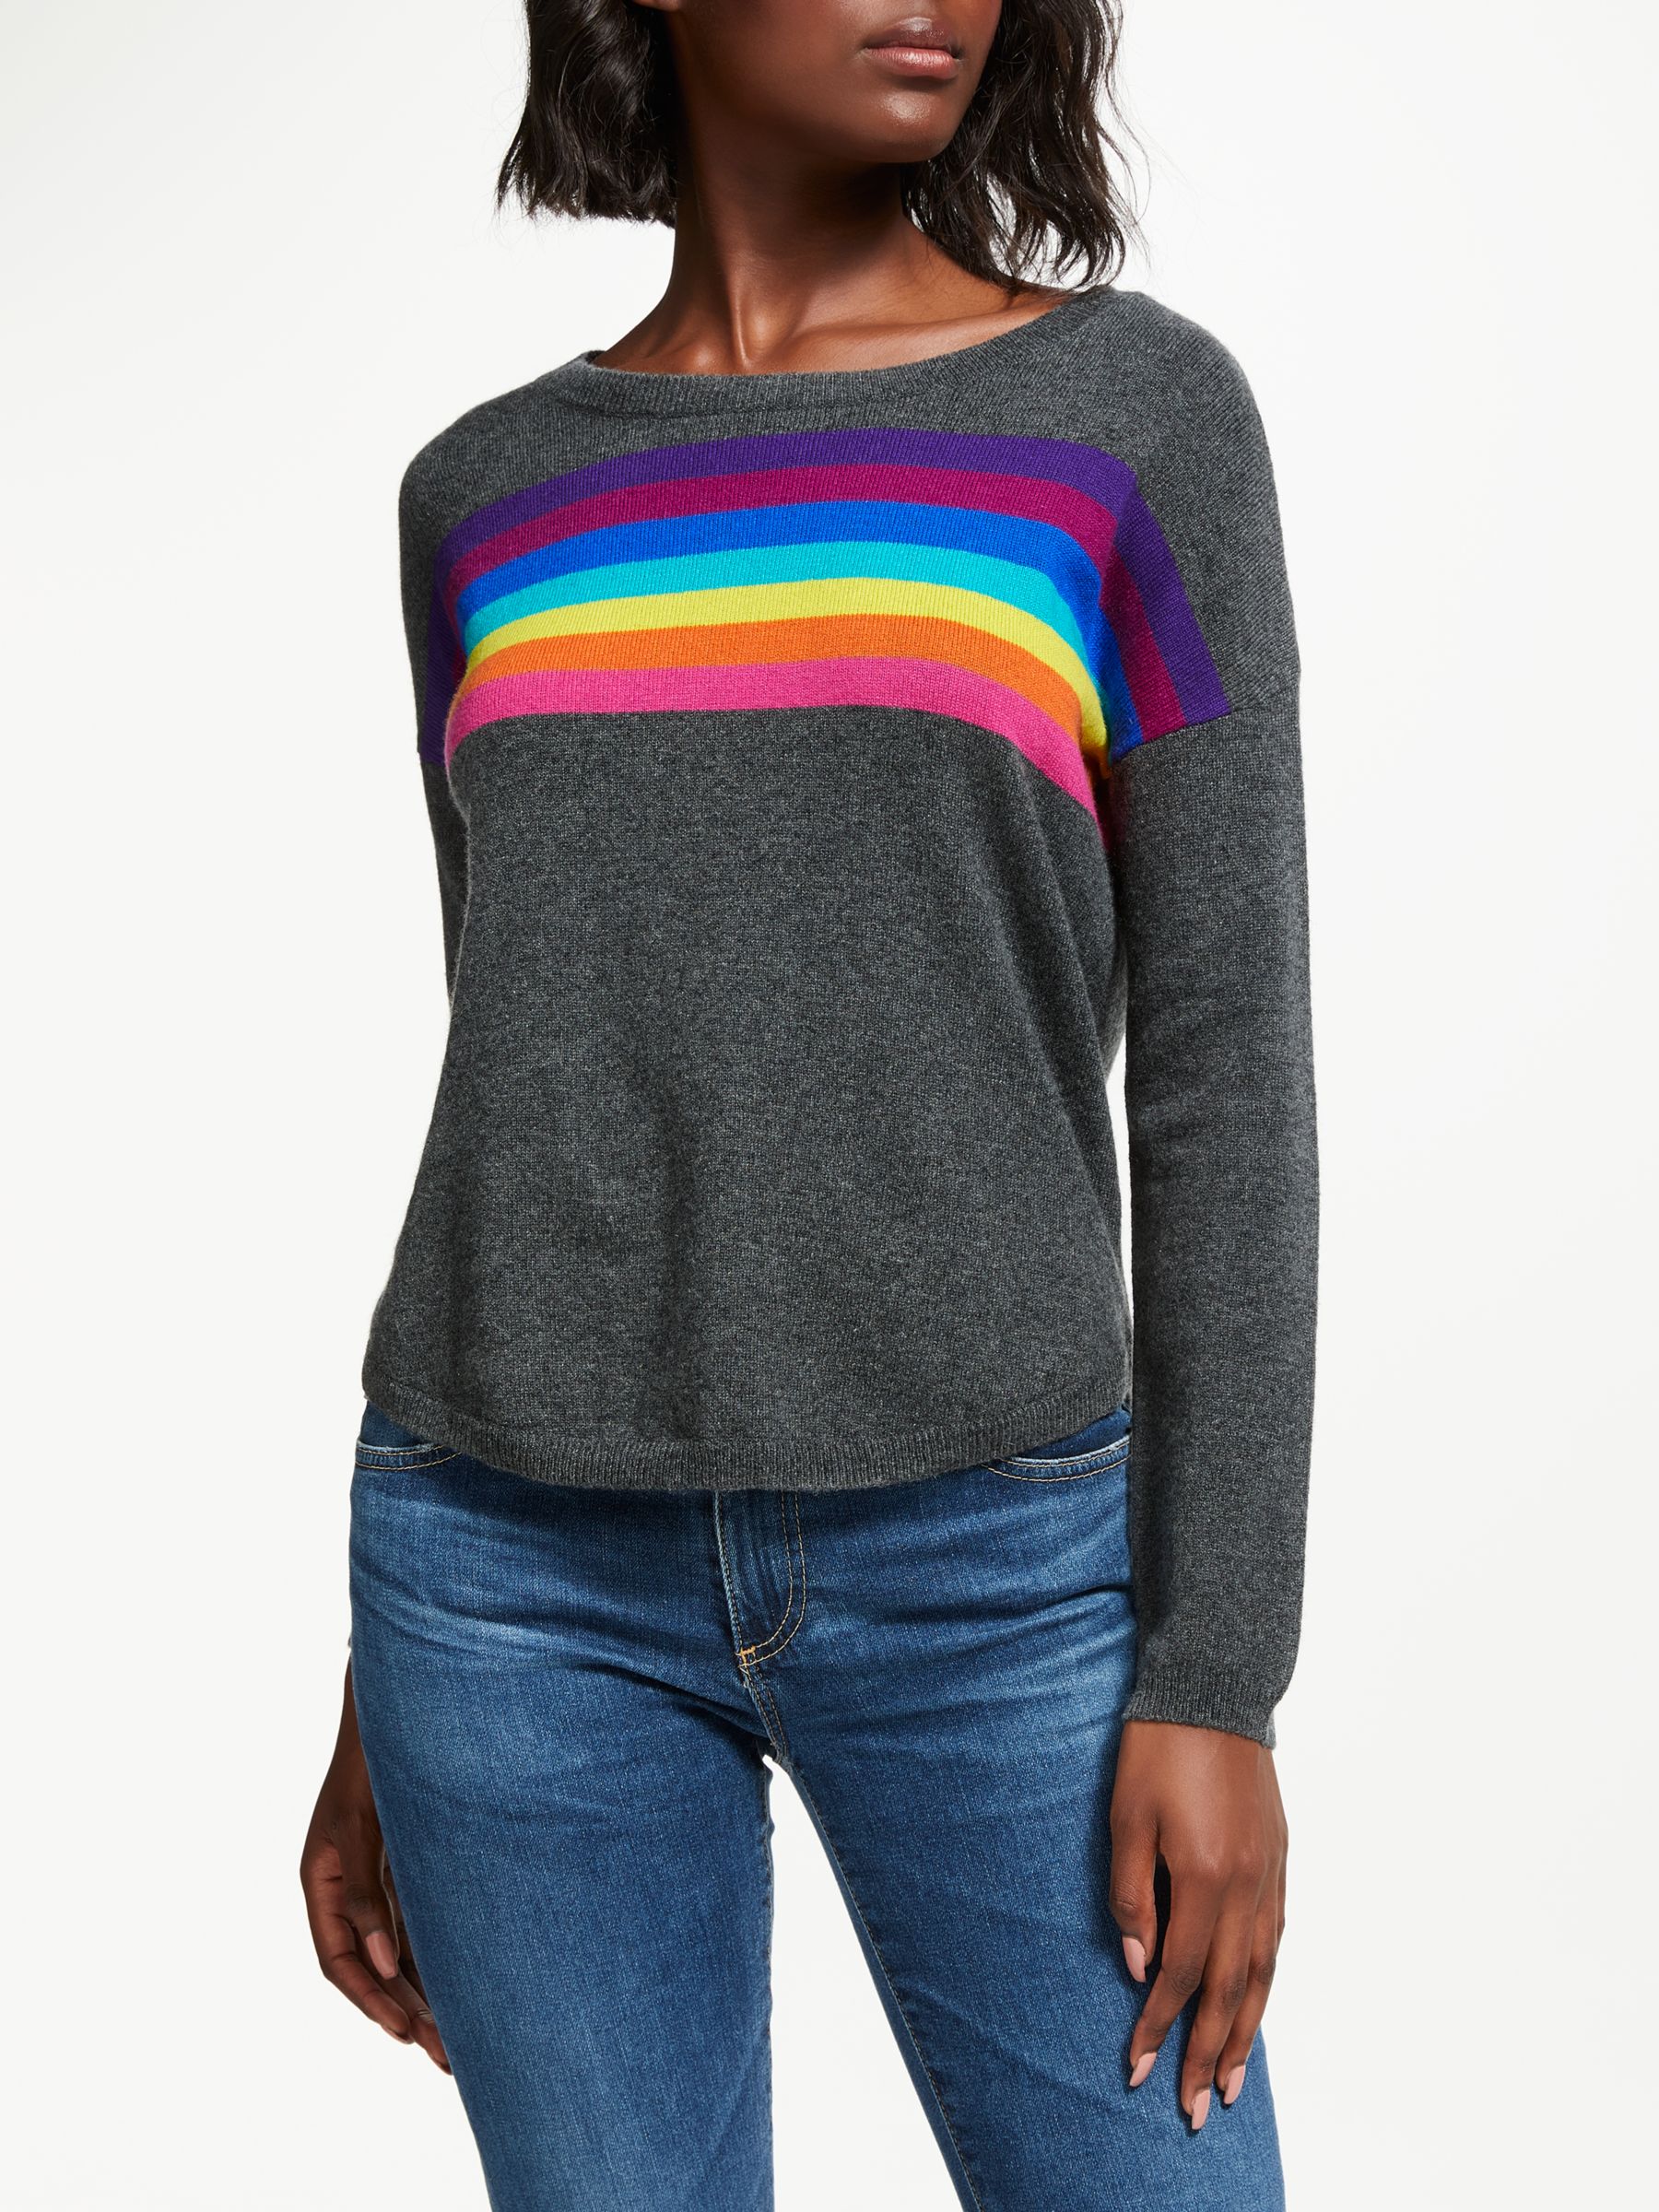 Wyse London Ines Slouchy Rainbow Cashmere Jumper, Charcoal at John ...